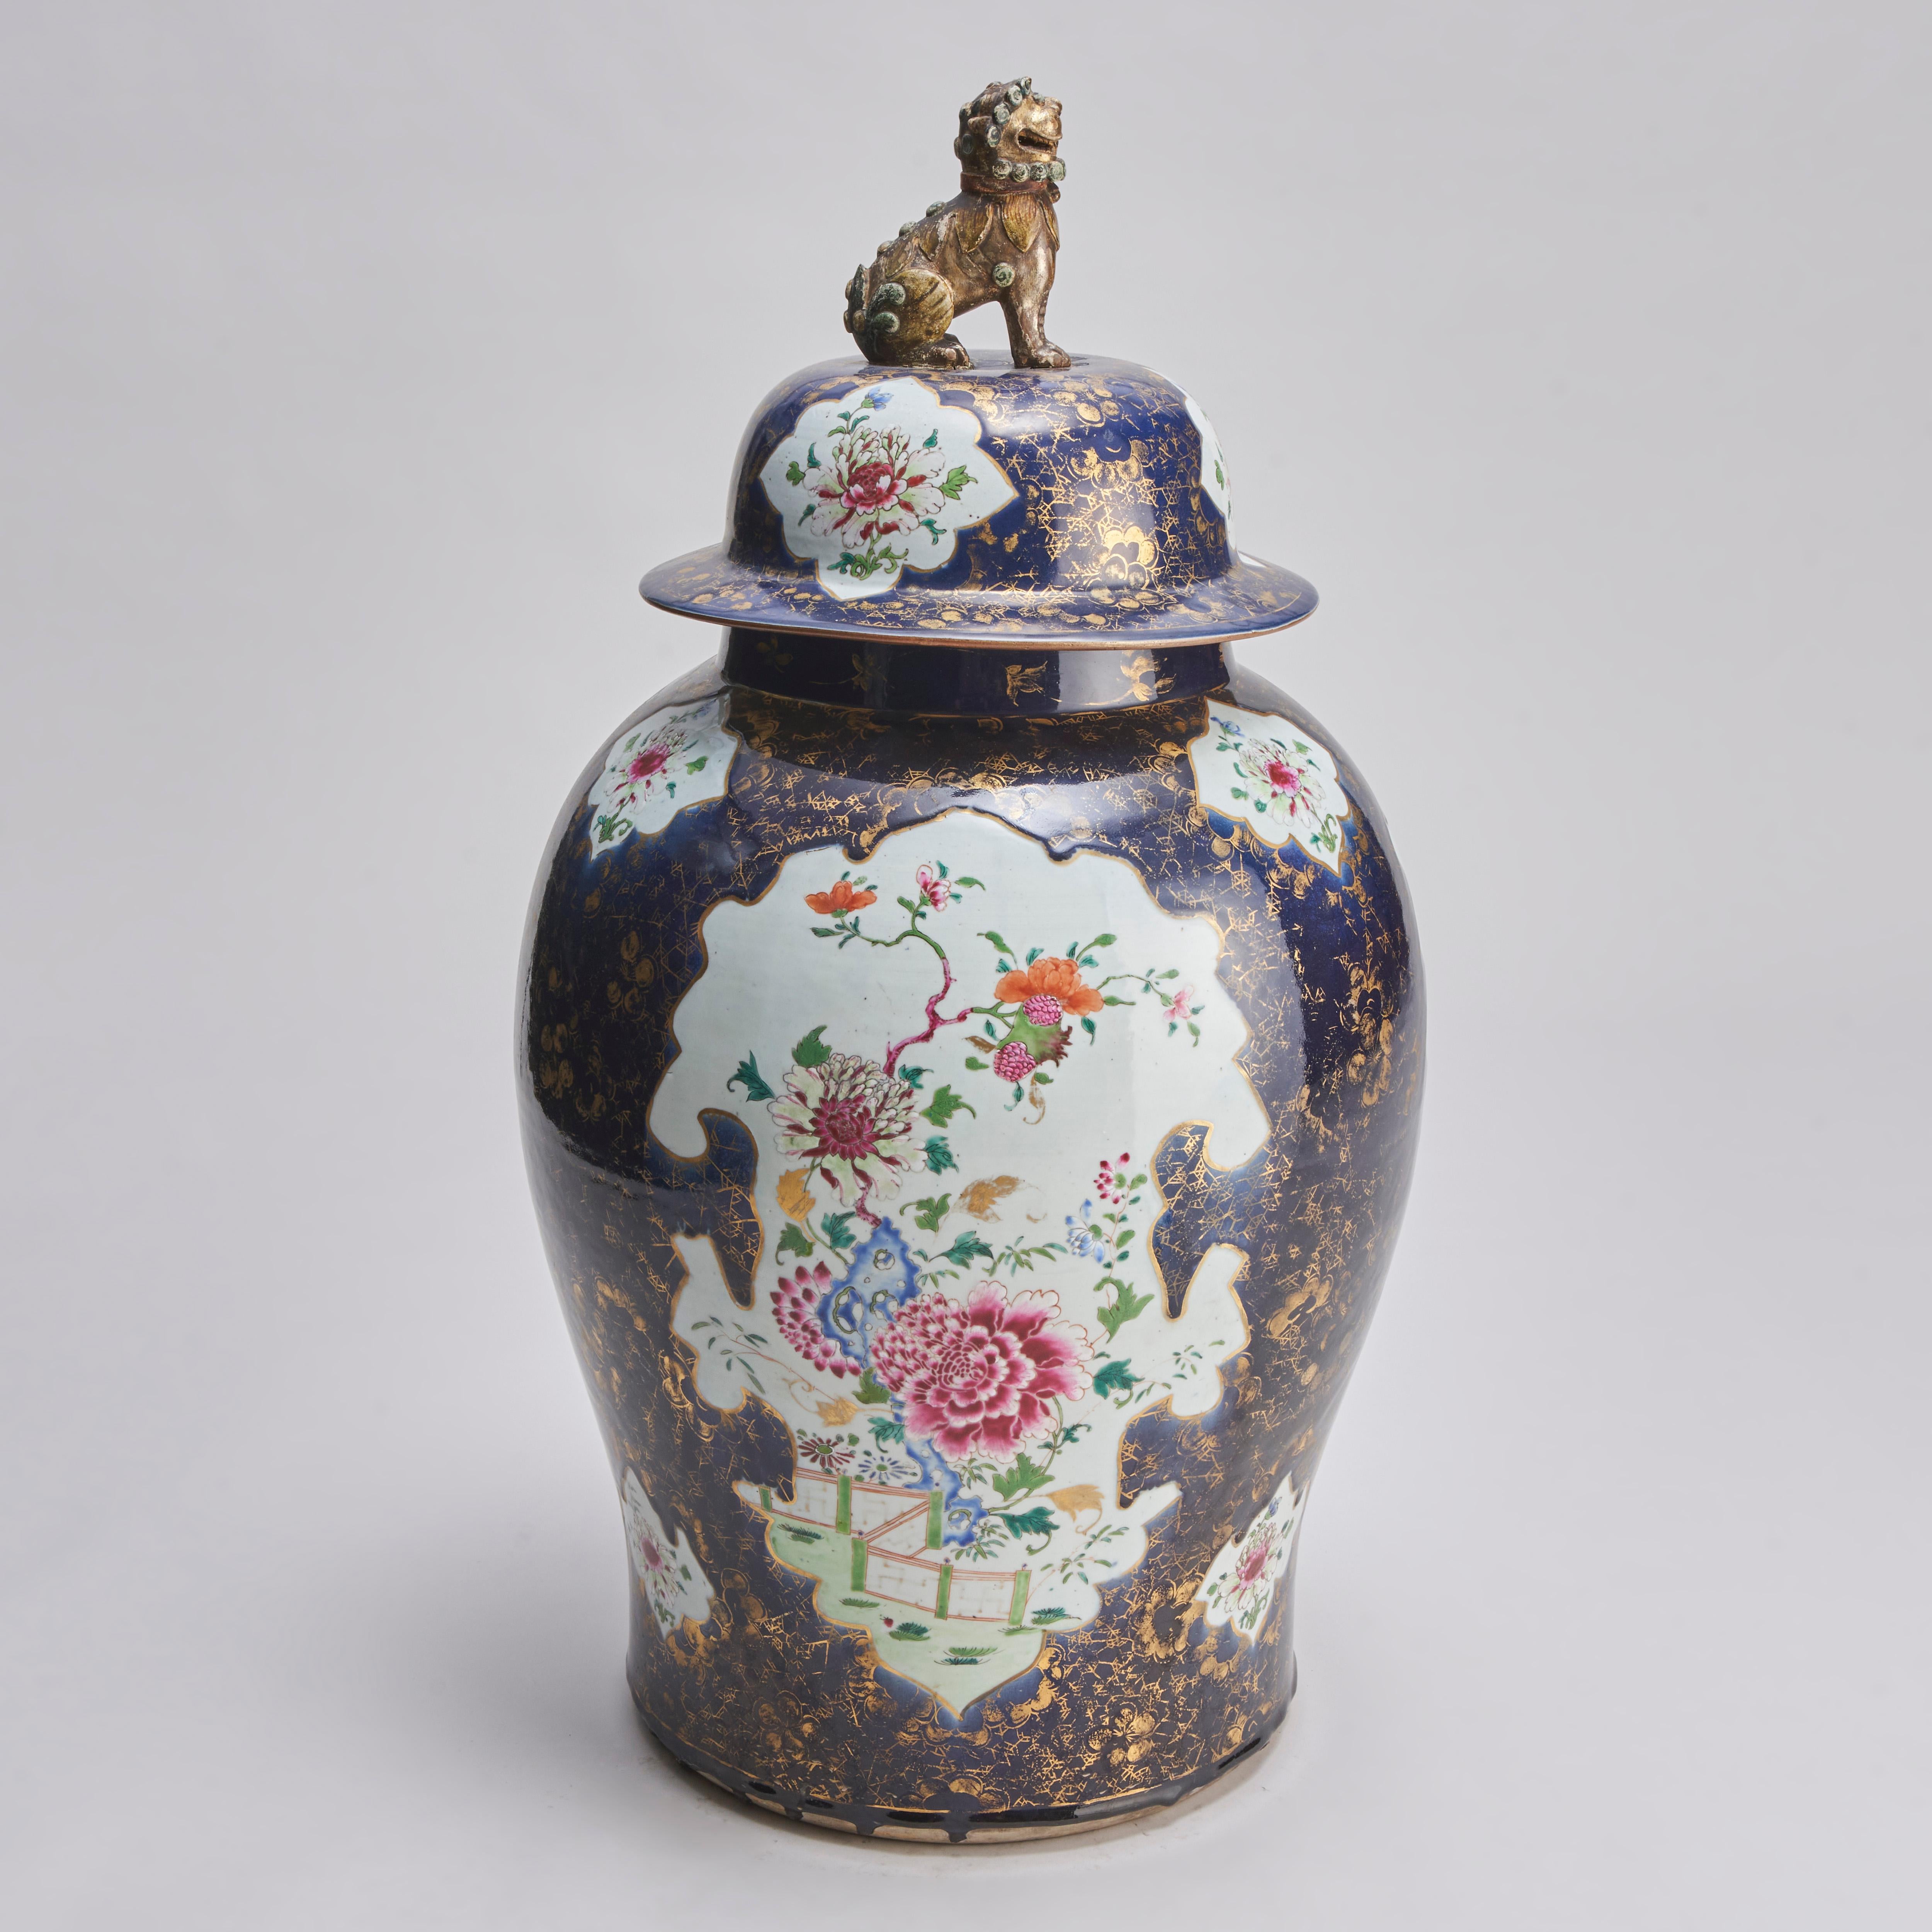 A large 18th century Chinese temple jar and cover with famille rose decoration of fantastical flowering shrubs on a powder blue ground with remnants of a spiderweb-like golden pattern.

The lid with matching decoration and a fine lion dog knop.

For